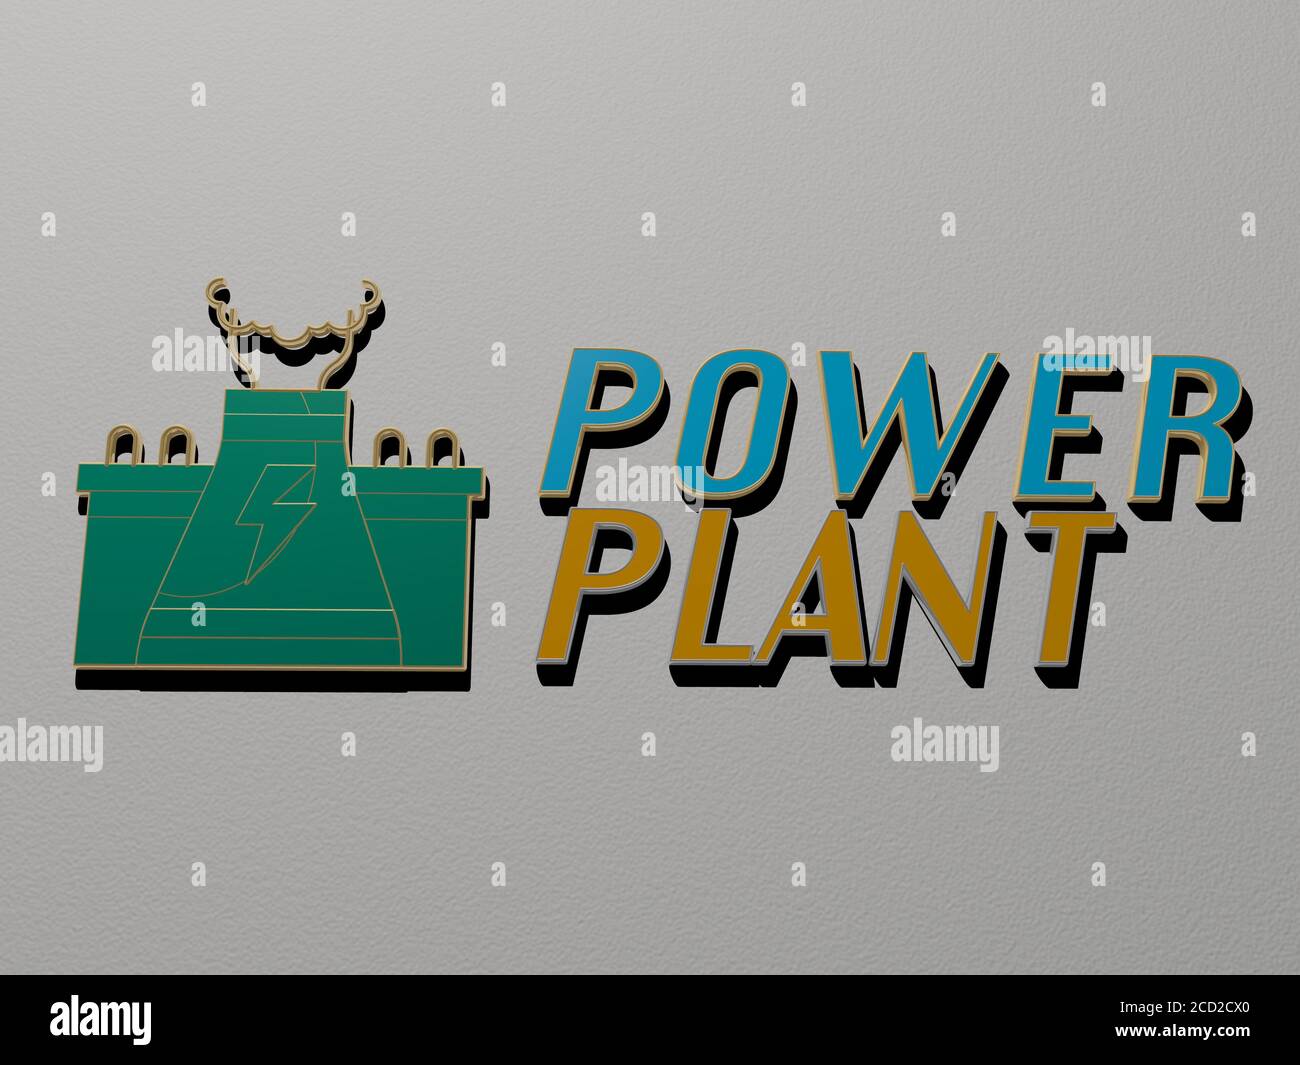 3D representation of POWER PLANT with icon on the wall and text arranged by metallic cubic letters on a mirror floor for concept meaning and slideshow presentation, 3D illustration Stock Photo